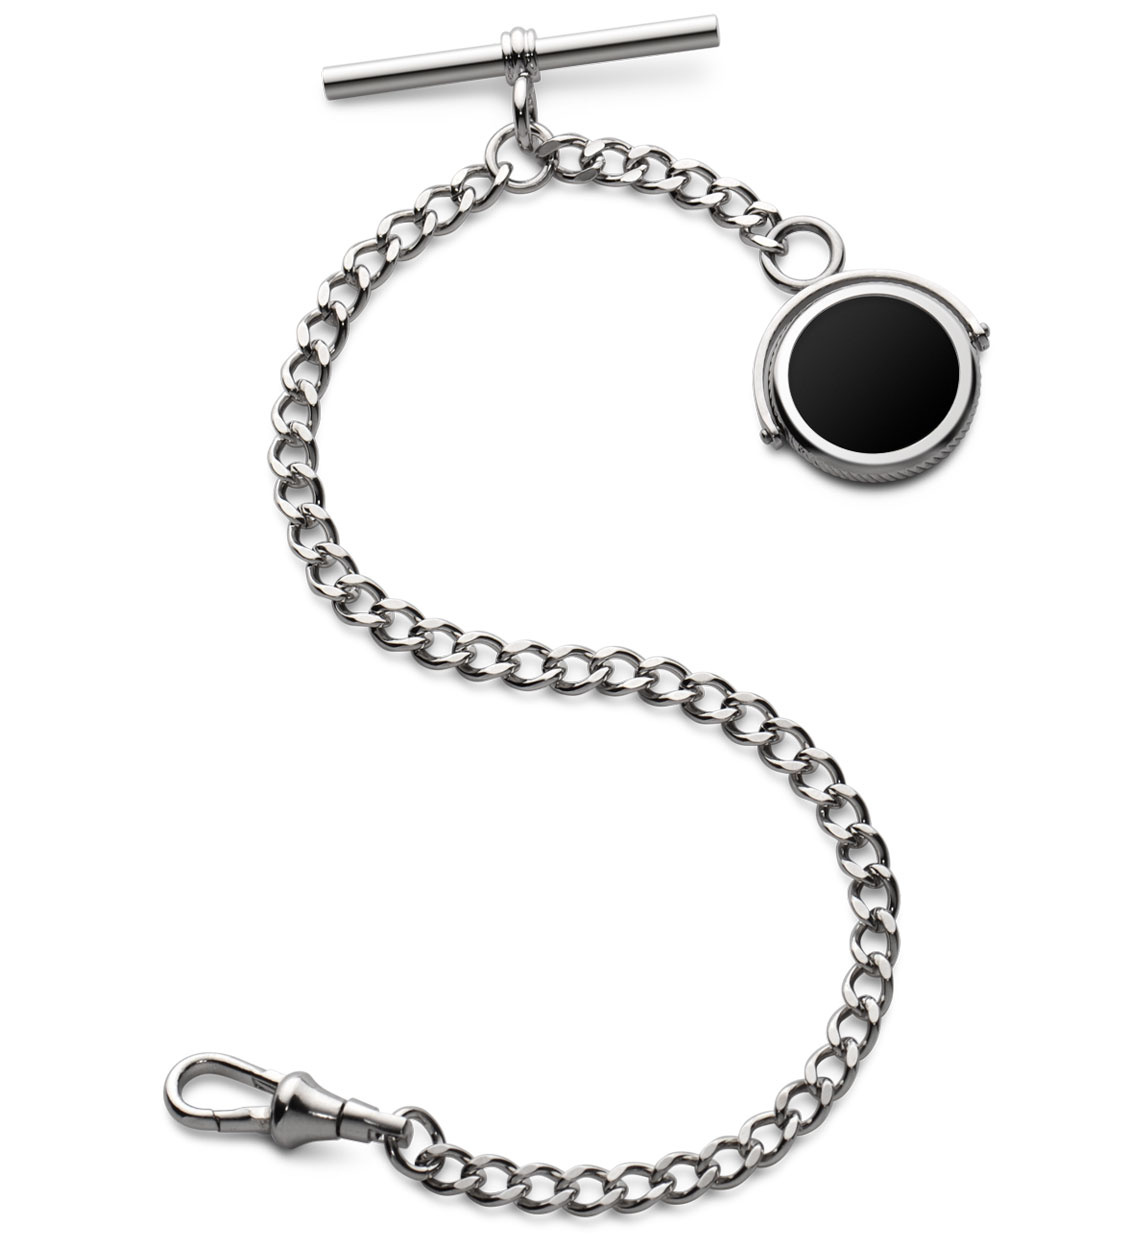 Platinum and Rose Gold Watch Chain and Locket Fob Necklace-hkpdtq2012.edu.vn